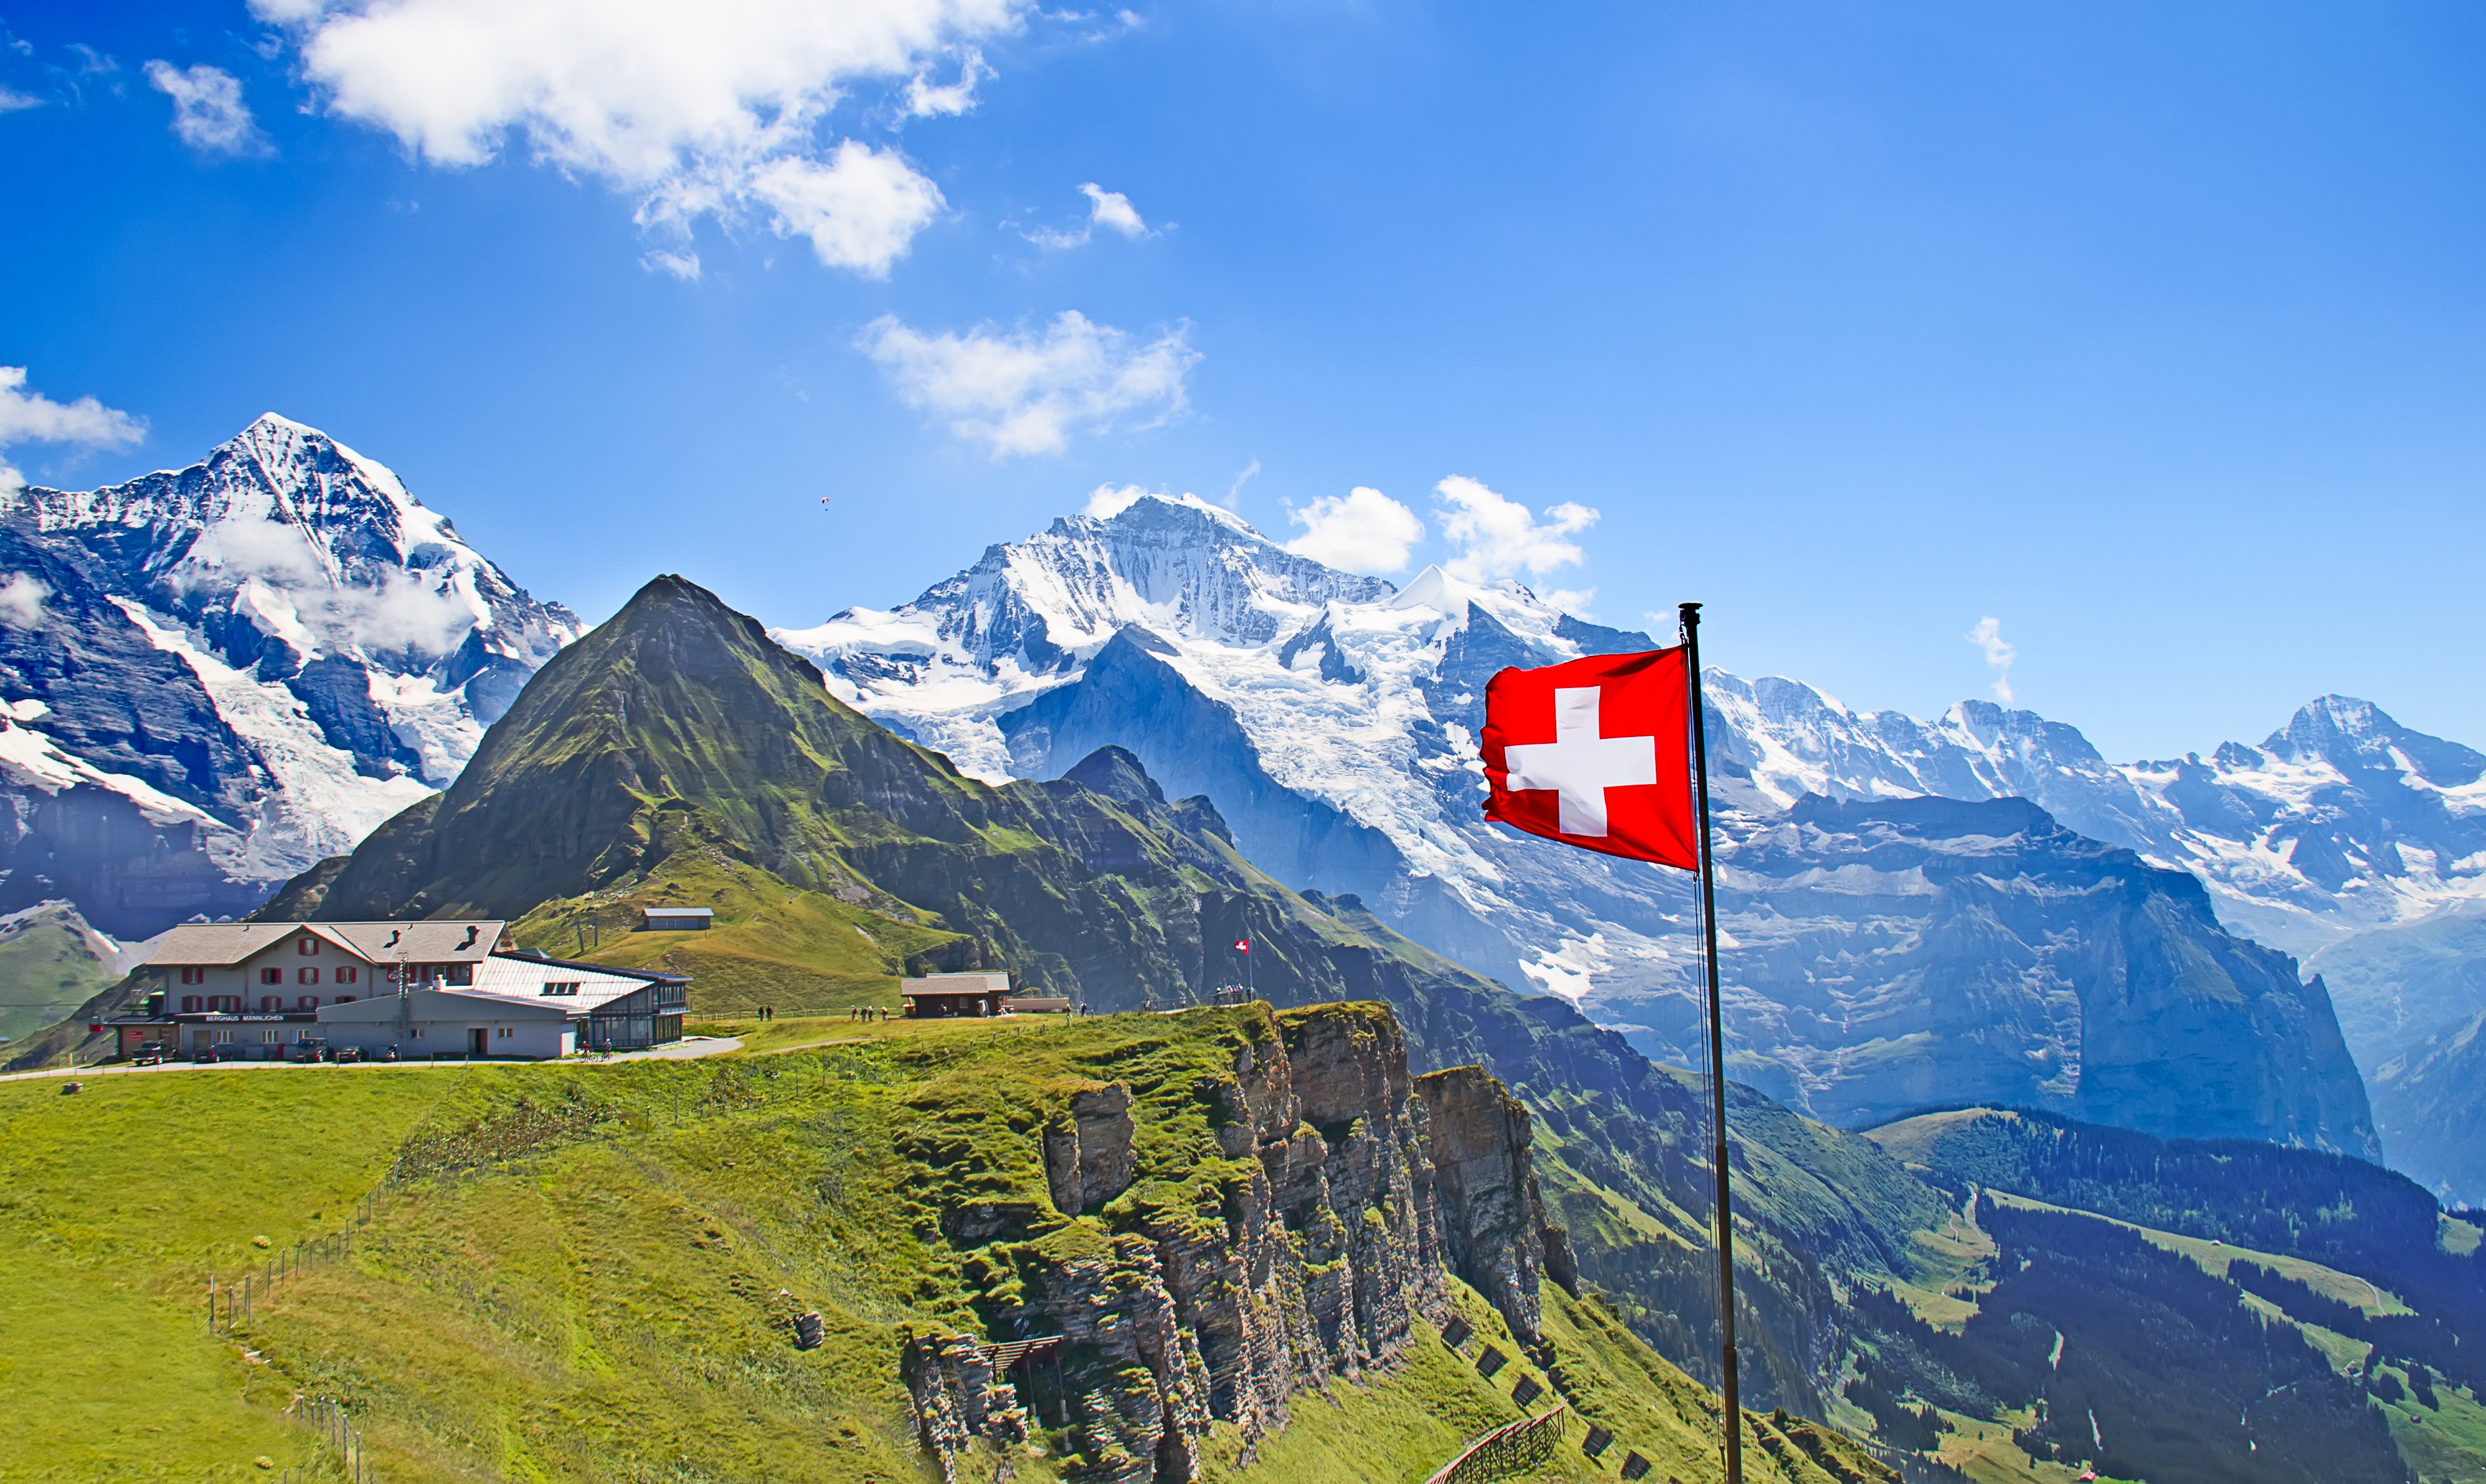 Alprockz Partners with Swiss Banks to Issue a New Stablecoin Backed by Swiss Franc